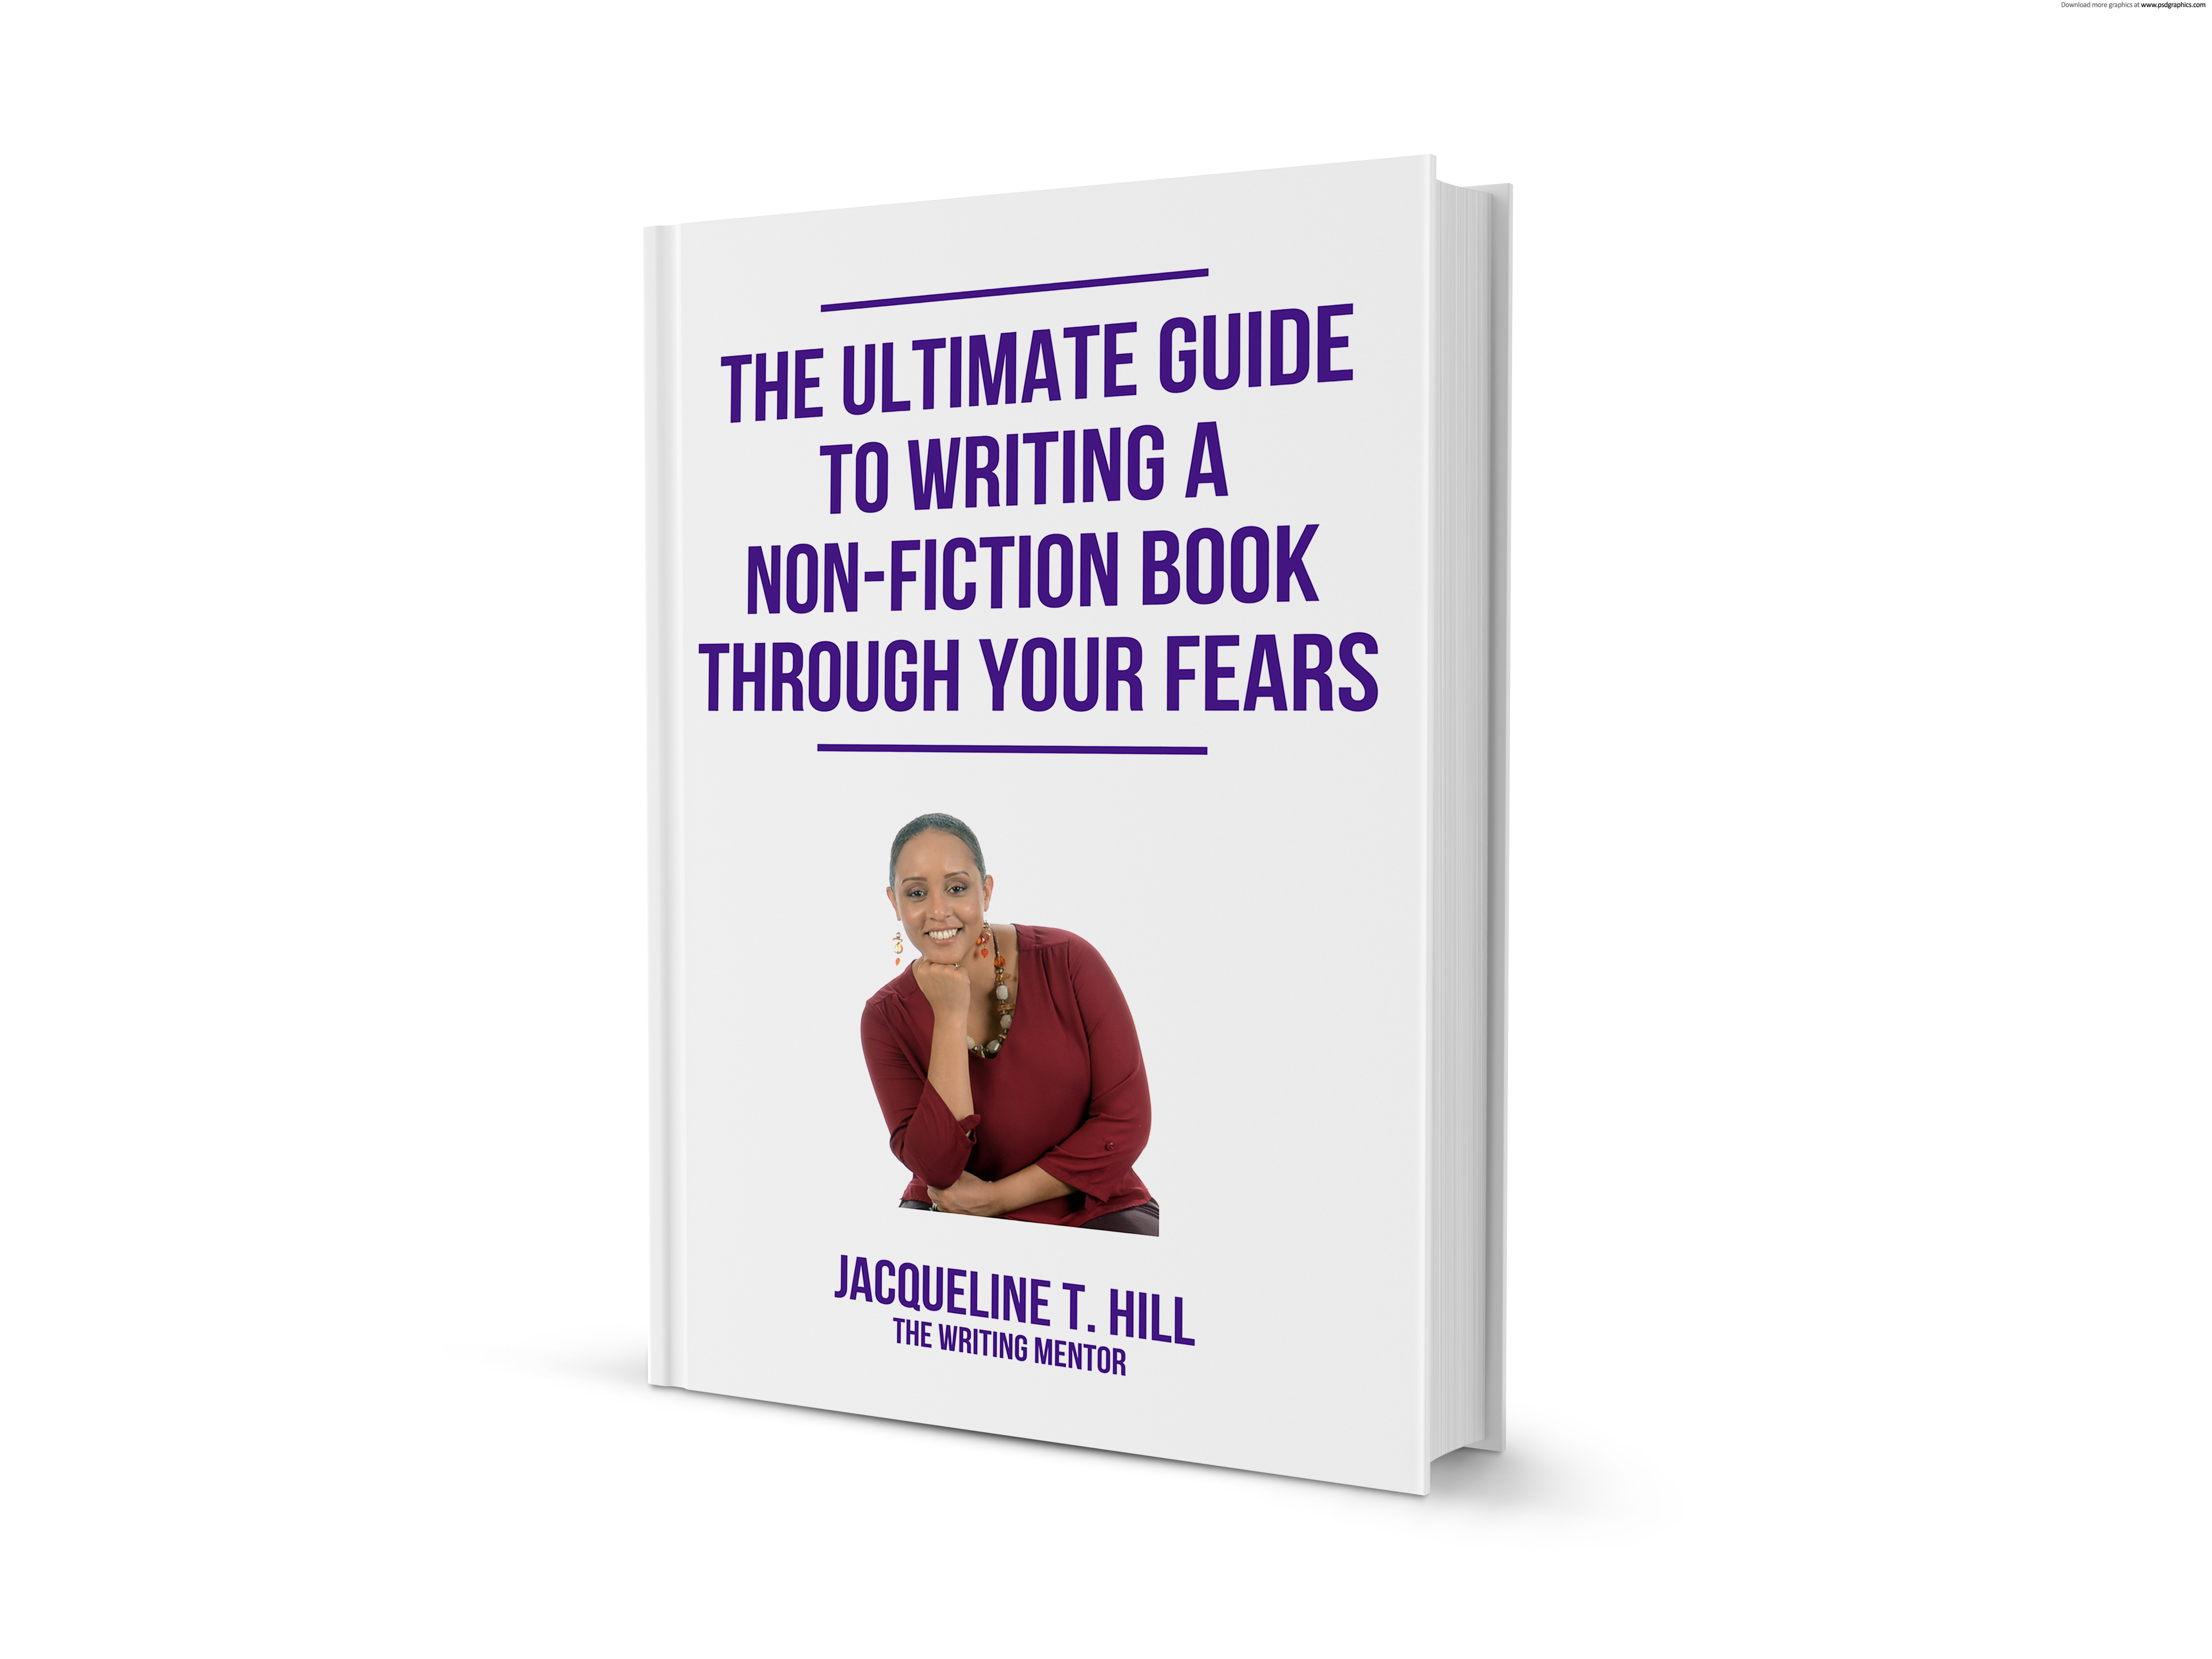 The Ultimate Guide to Writing A Non-Fiction Book